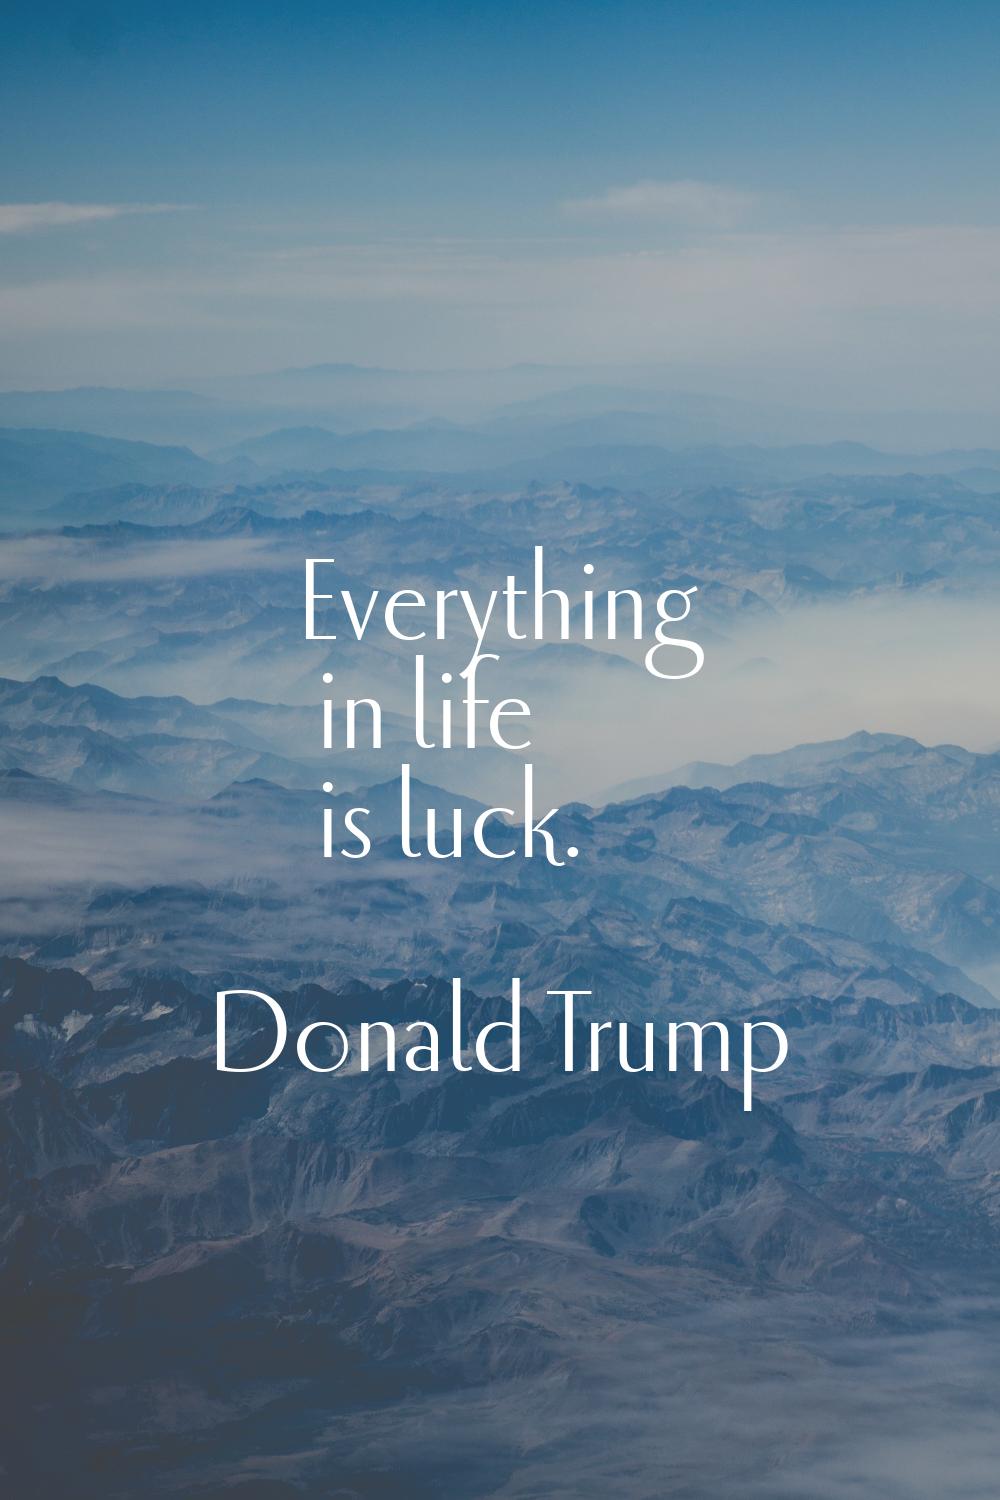 Everything in life is luck.